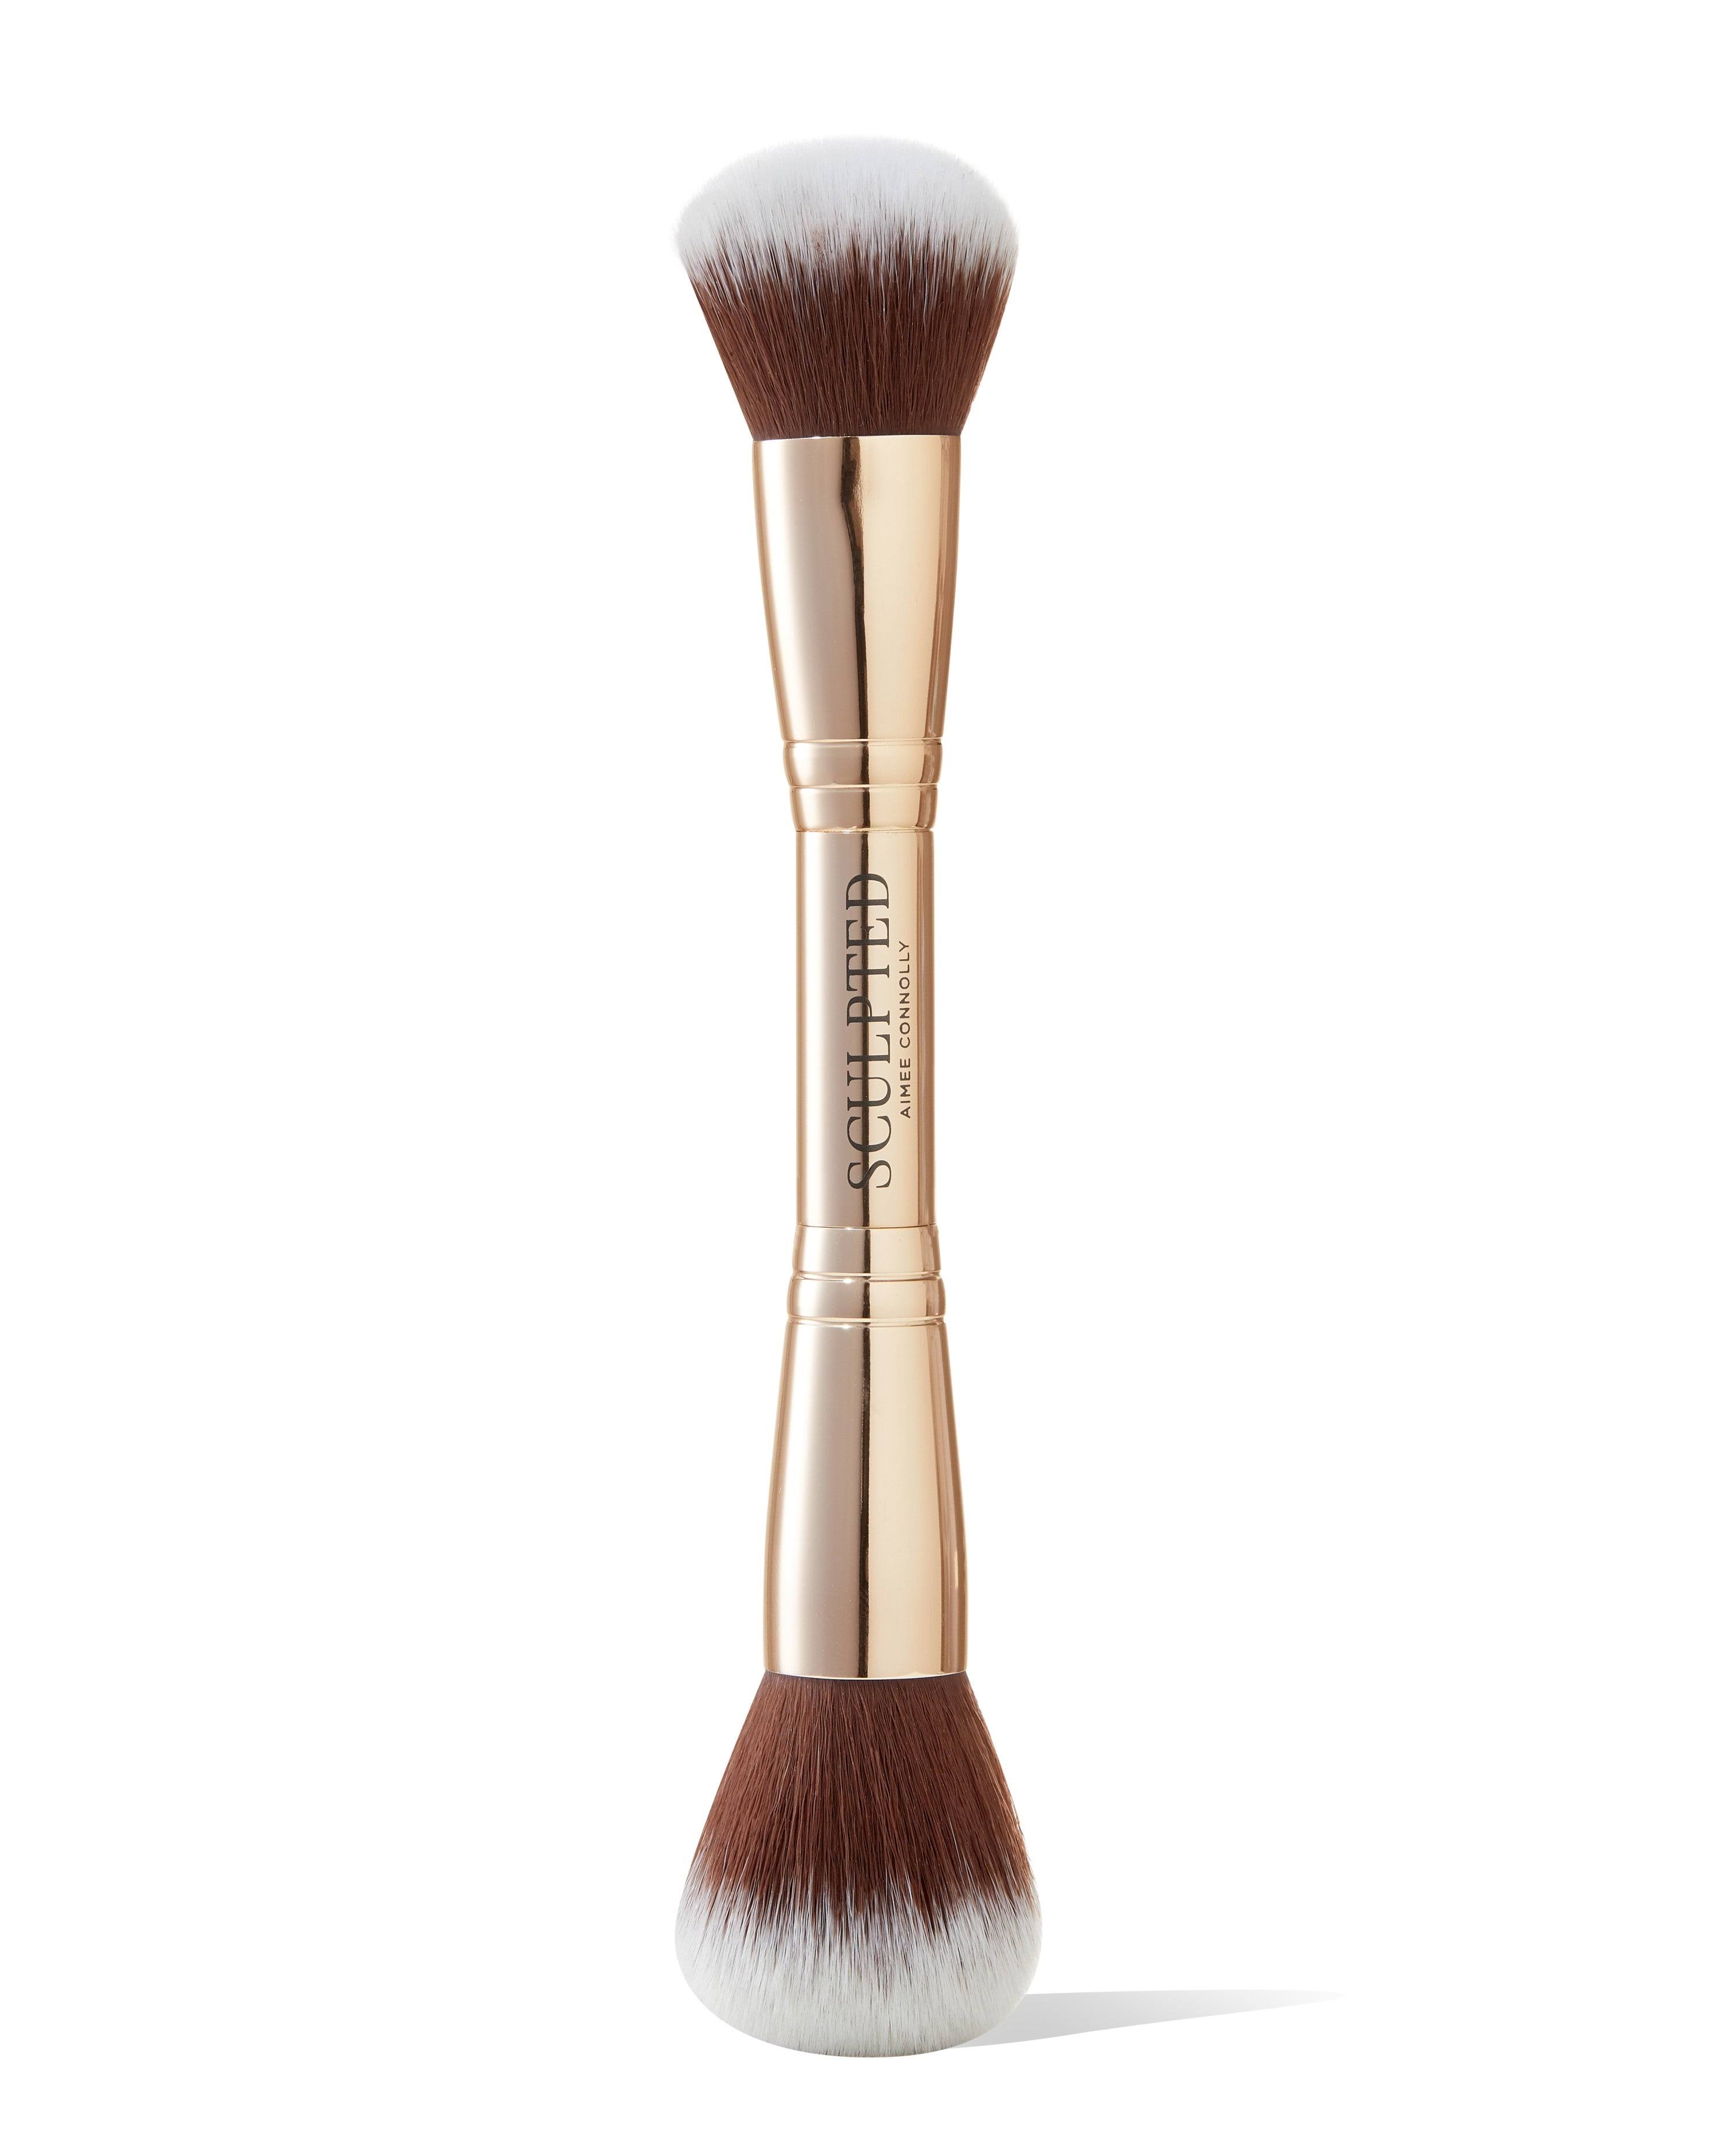 Sculpted by Aimee Connolly Foundation Duo Double Ended Brush